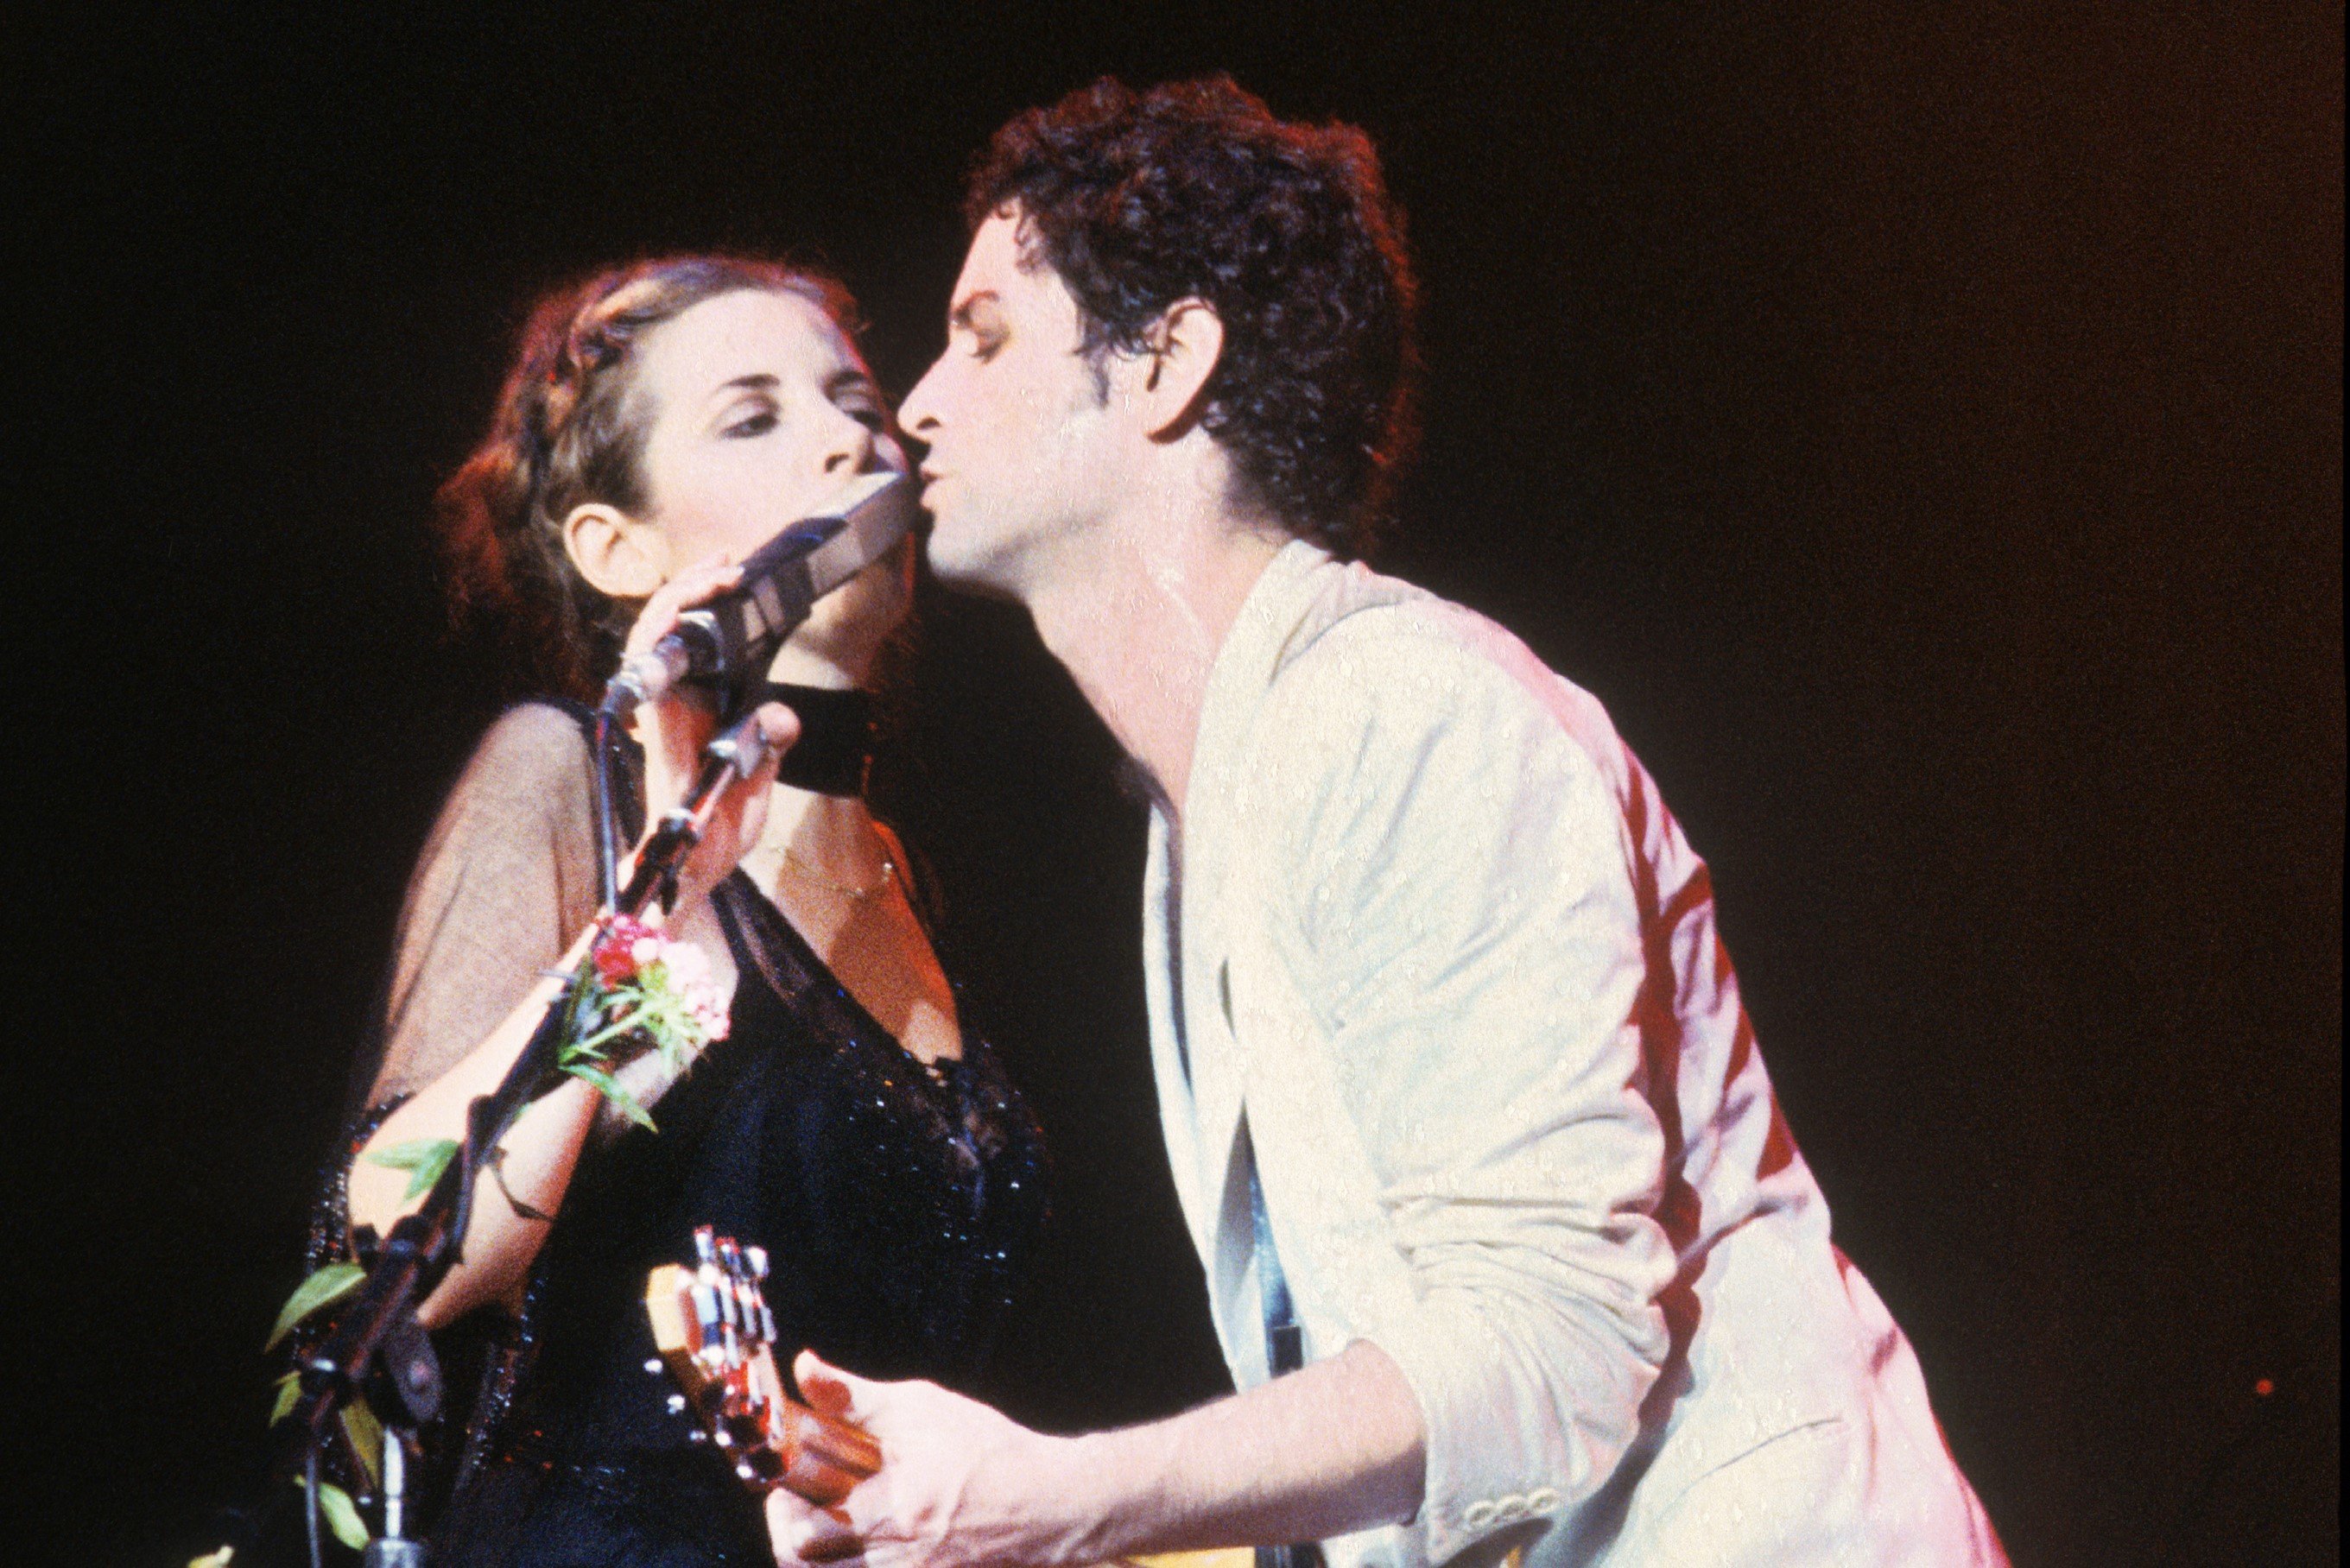 Stevie Nicks shares a microphone with Lindsey Buckingham, who plays the guitar.